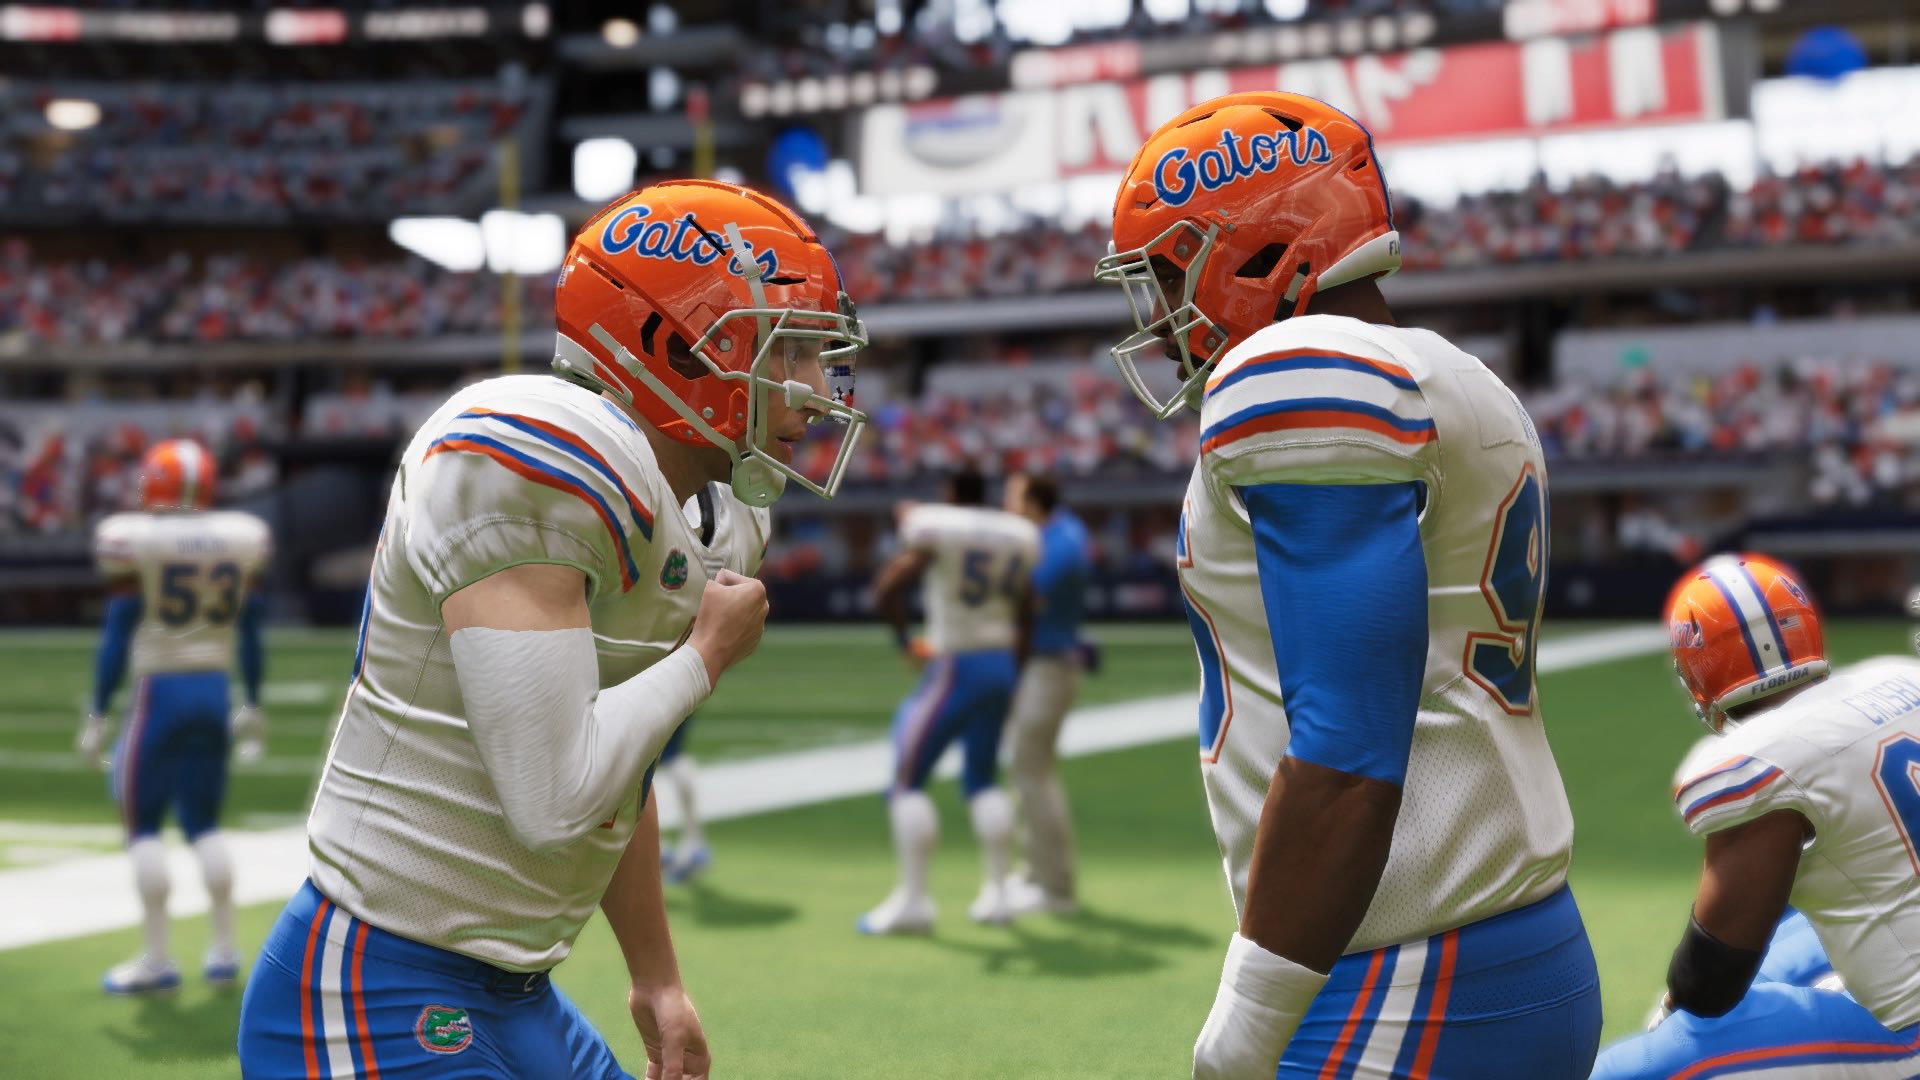 Next-Gen NCAA Football - What Could It Look Like On PS5?